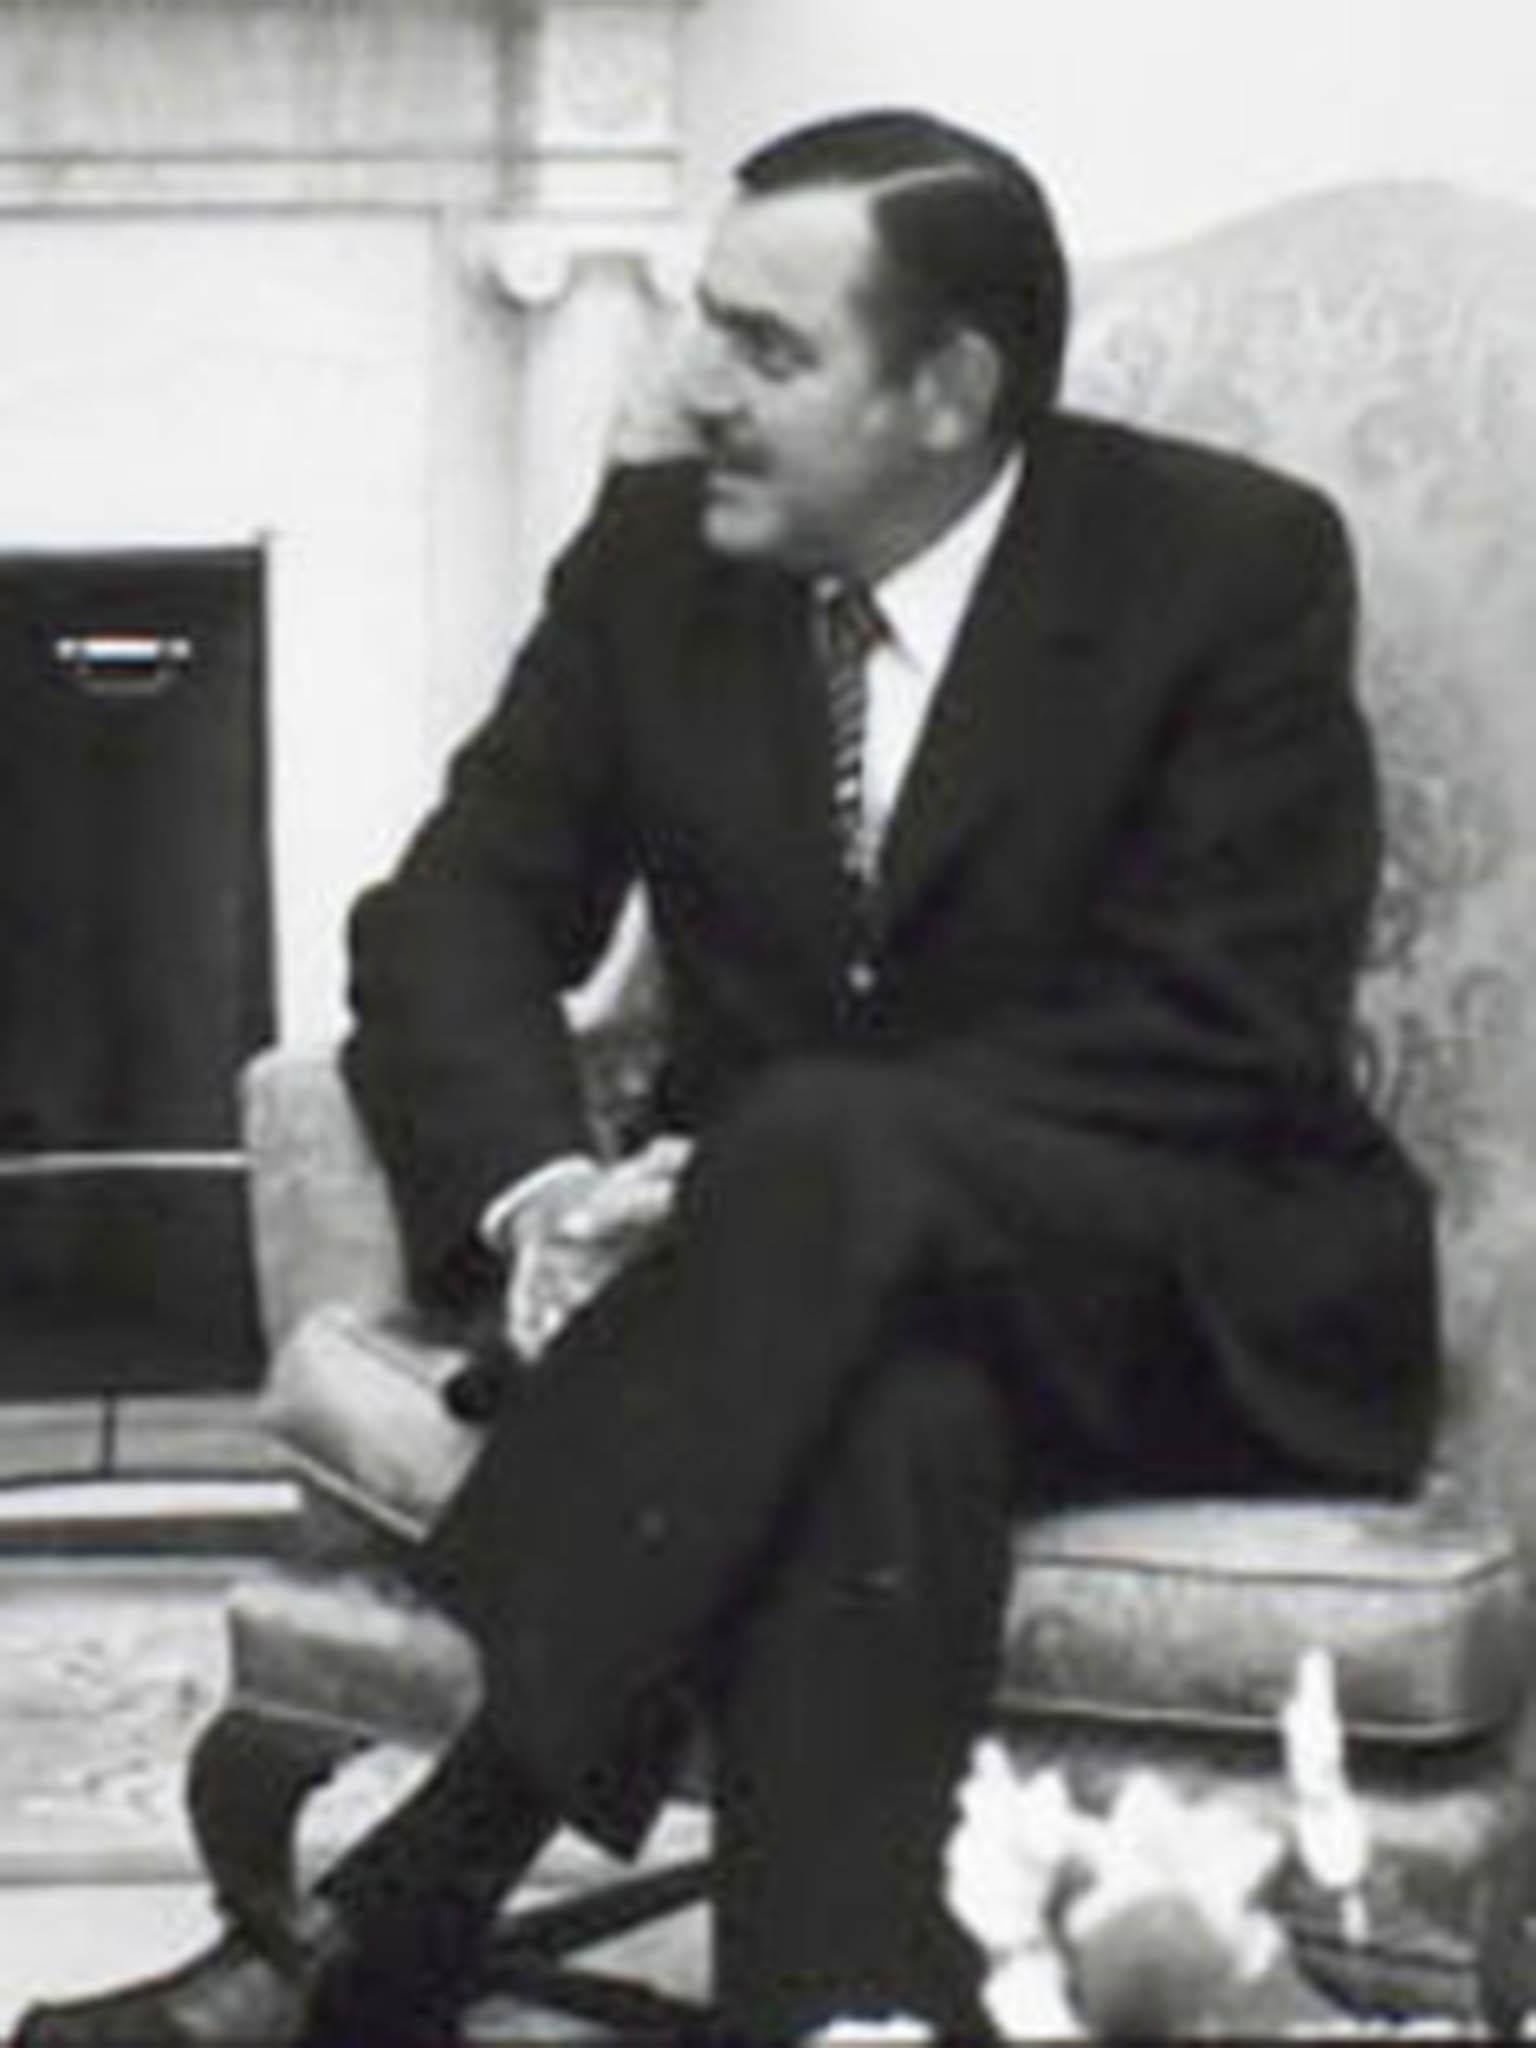 Pik Botha had a short but highly confidential meeting with Margaret Thatcher in London